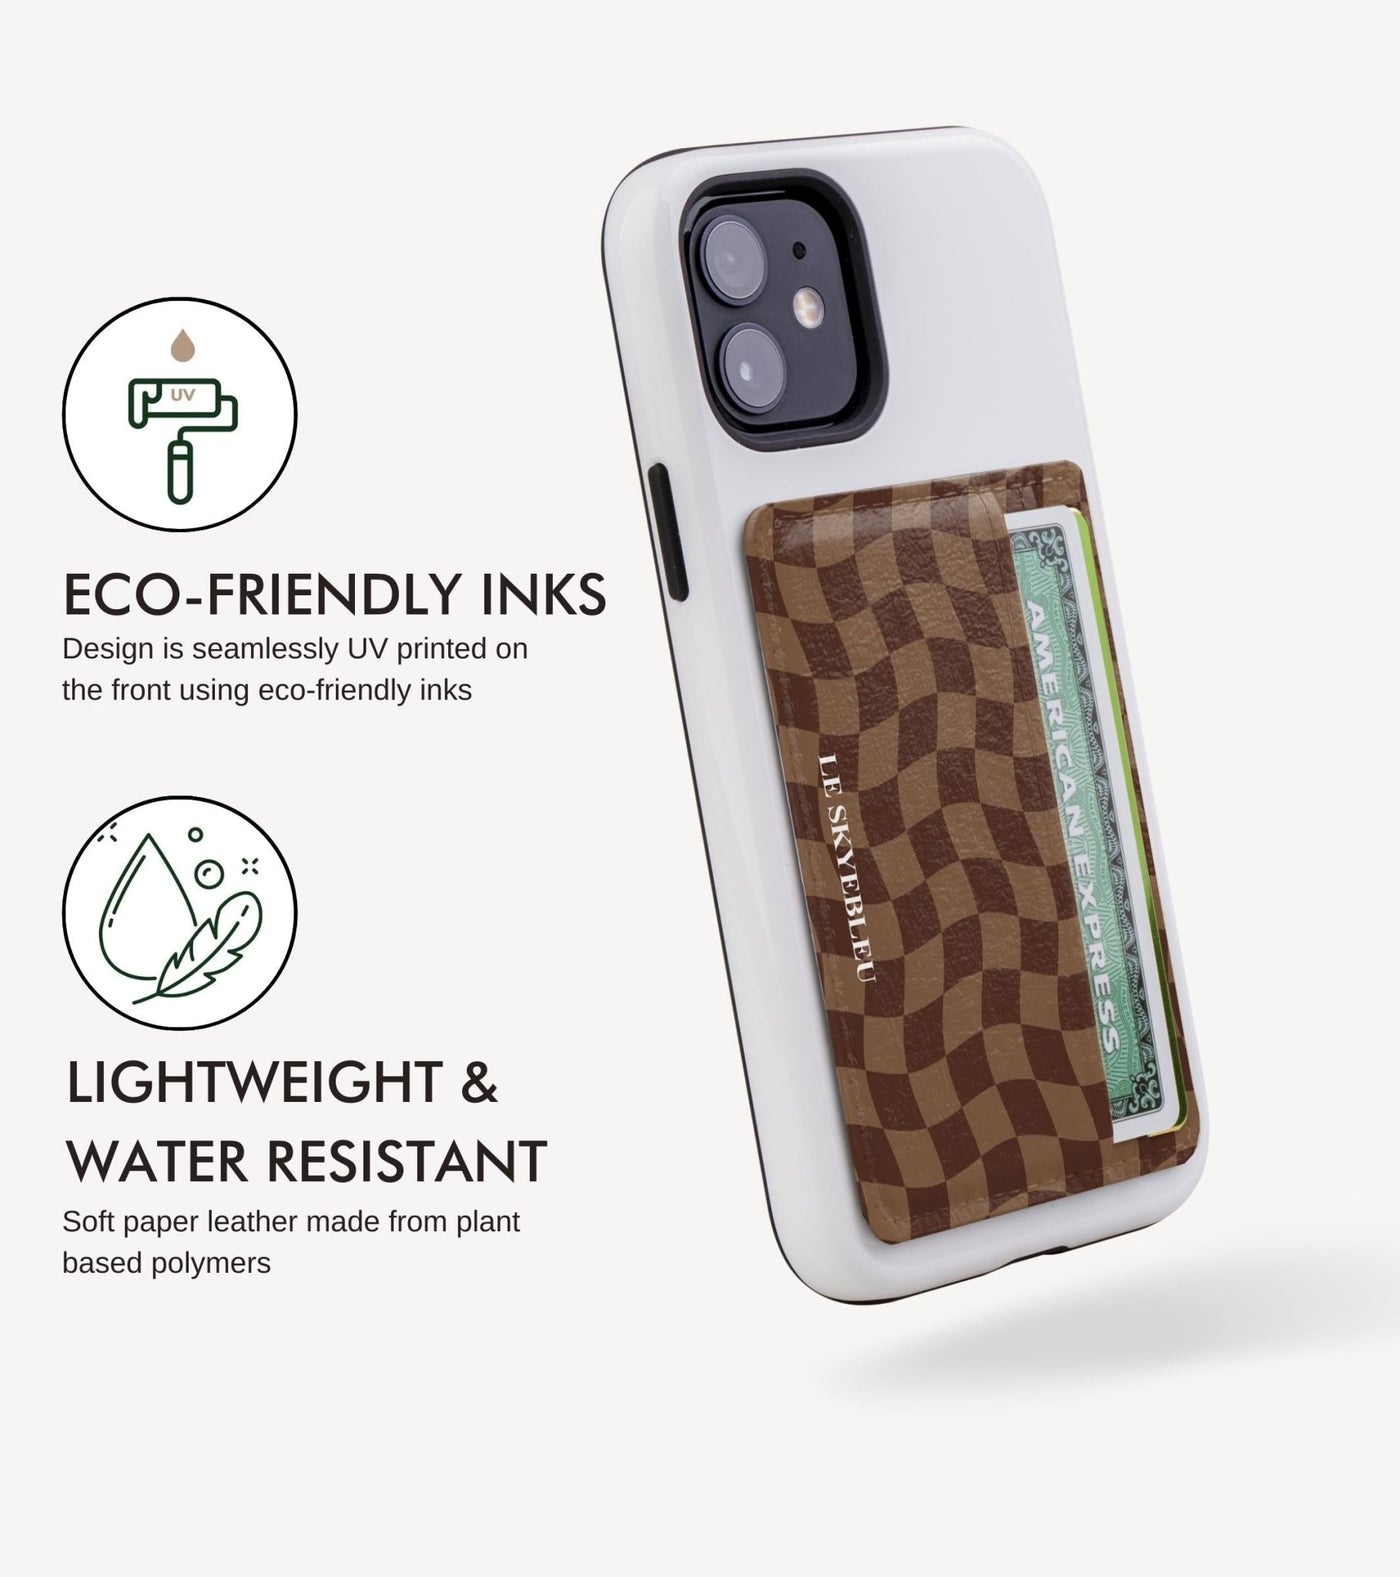 Choco-Board - Stick on Phone Wallet